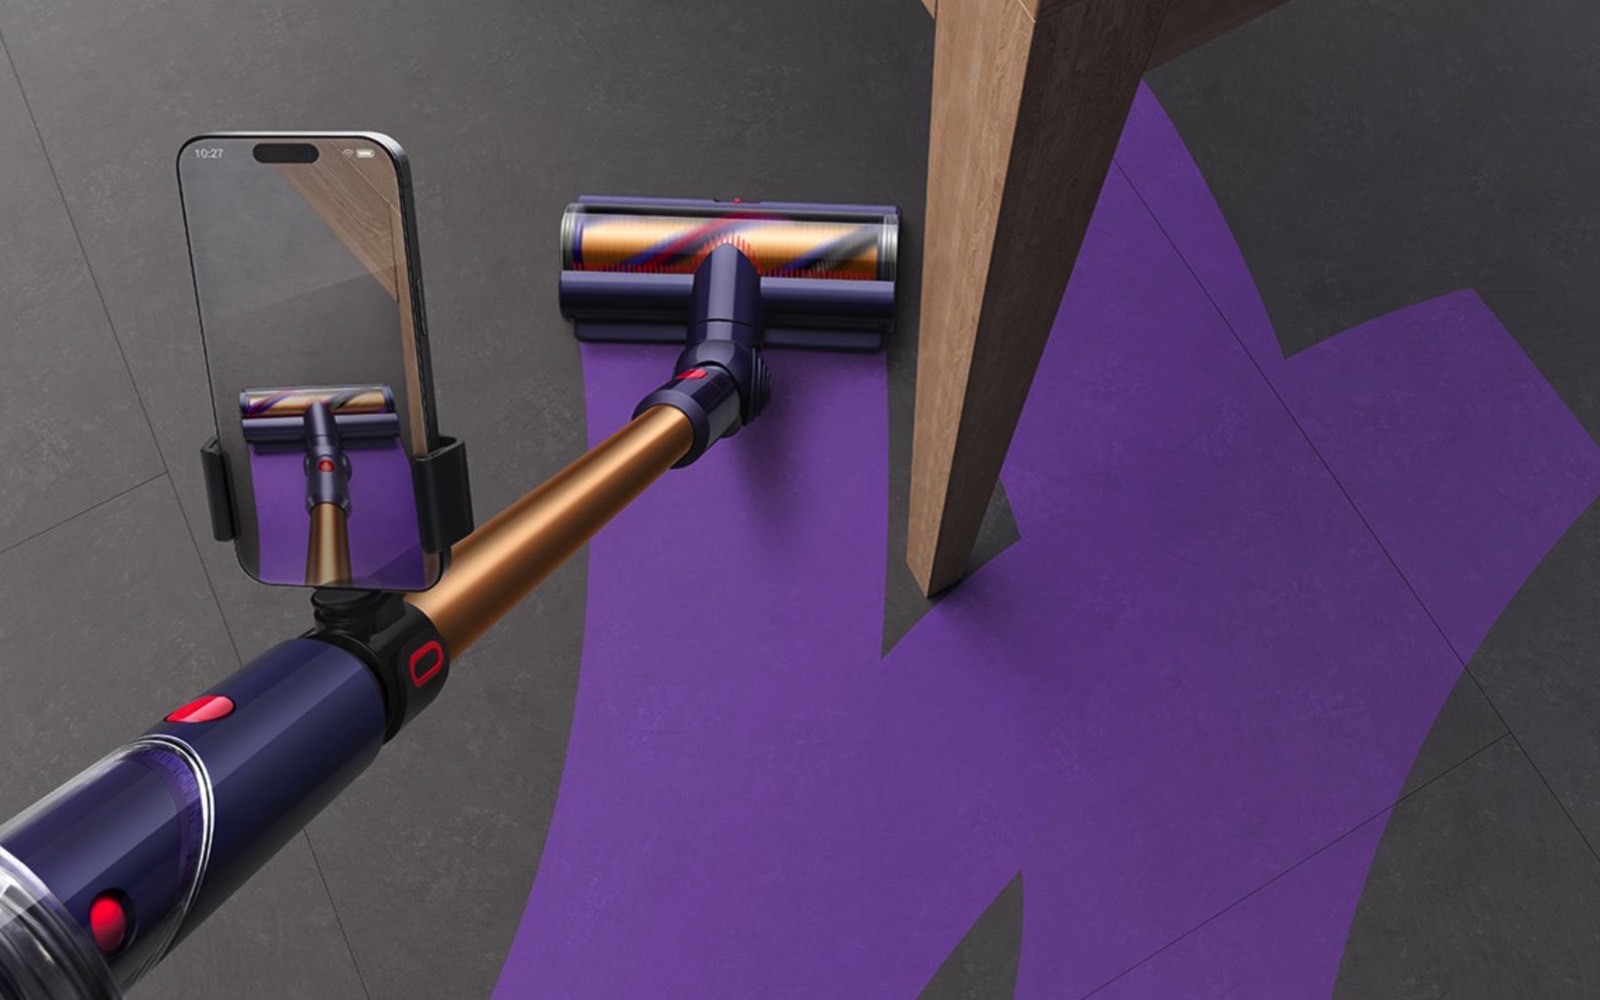 Dyson mount for smartphones so you ca use the CleanTrace app while you vacuum.